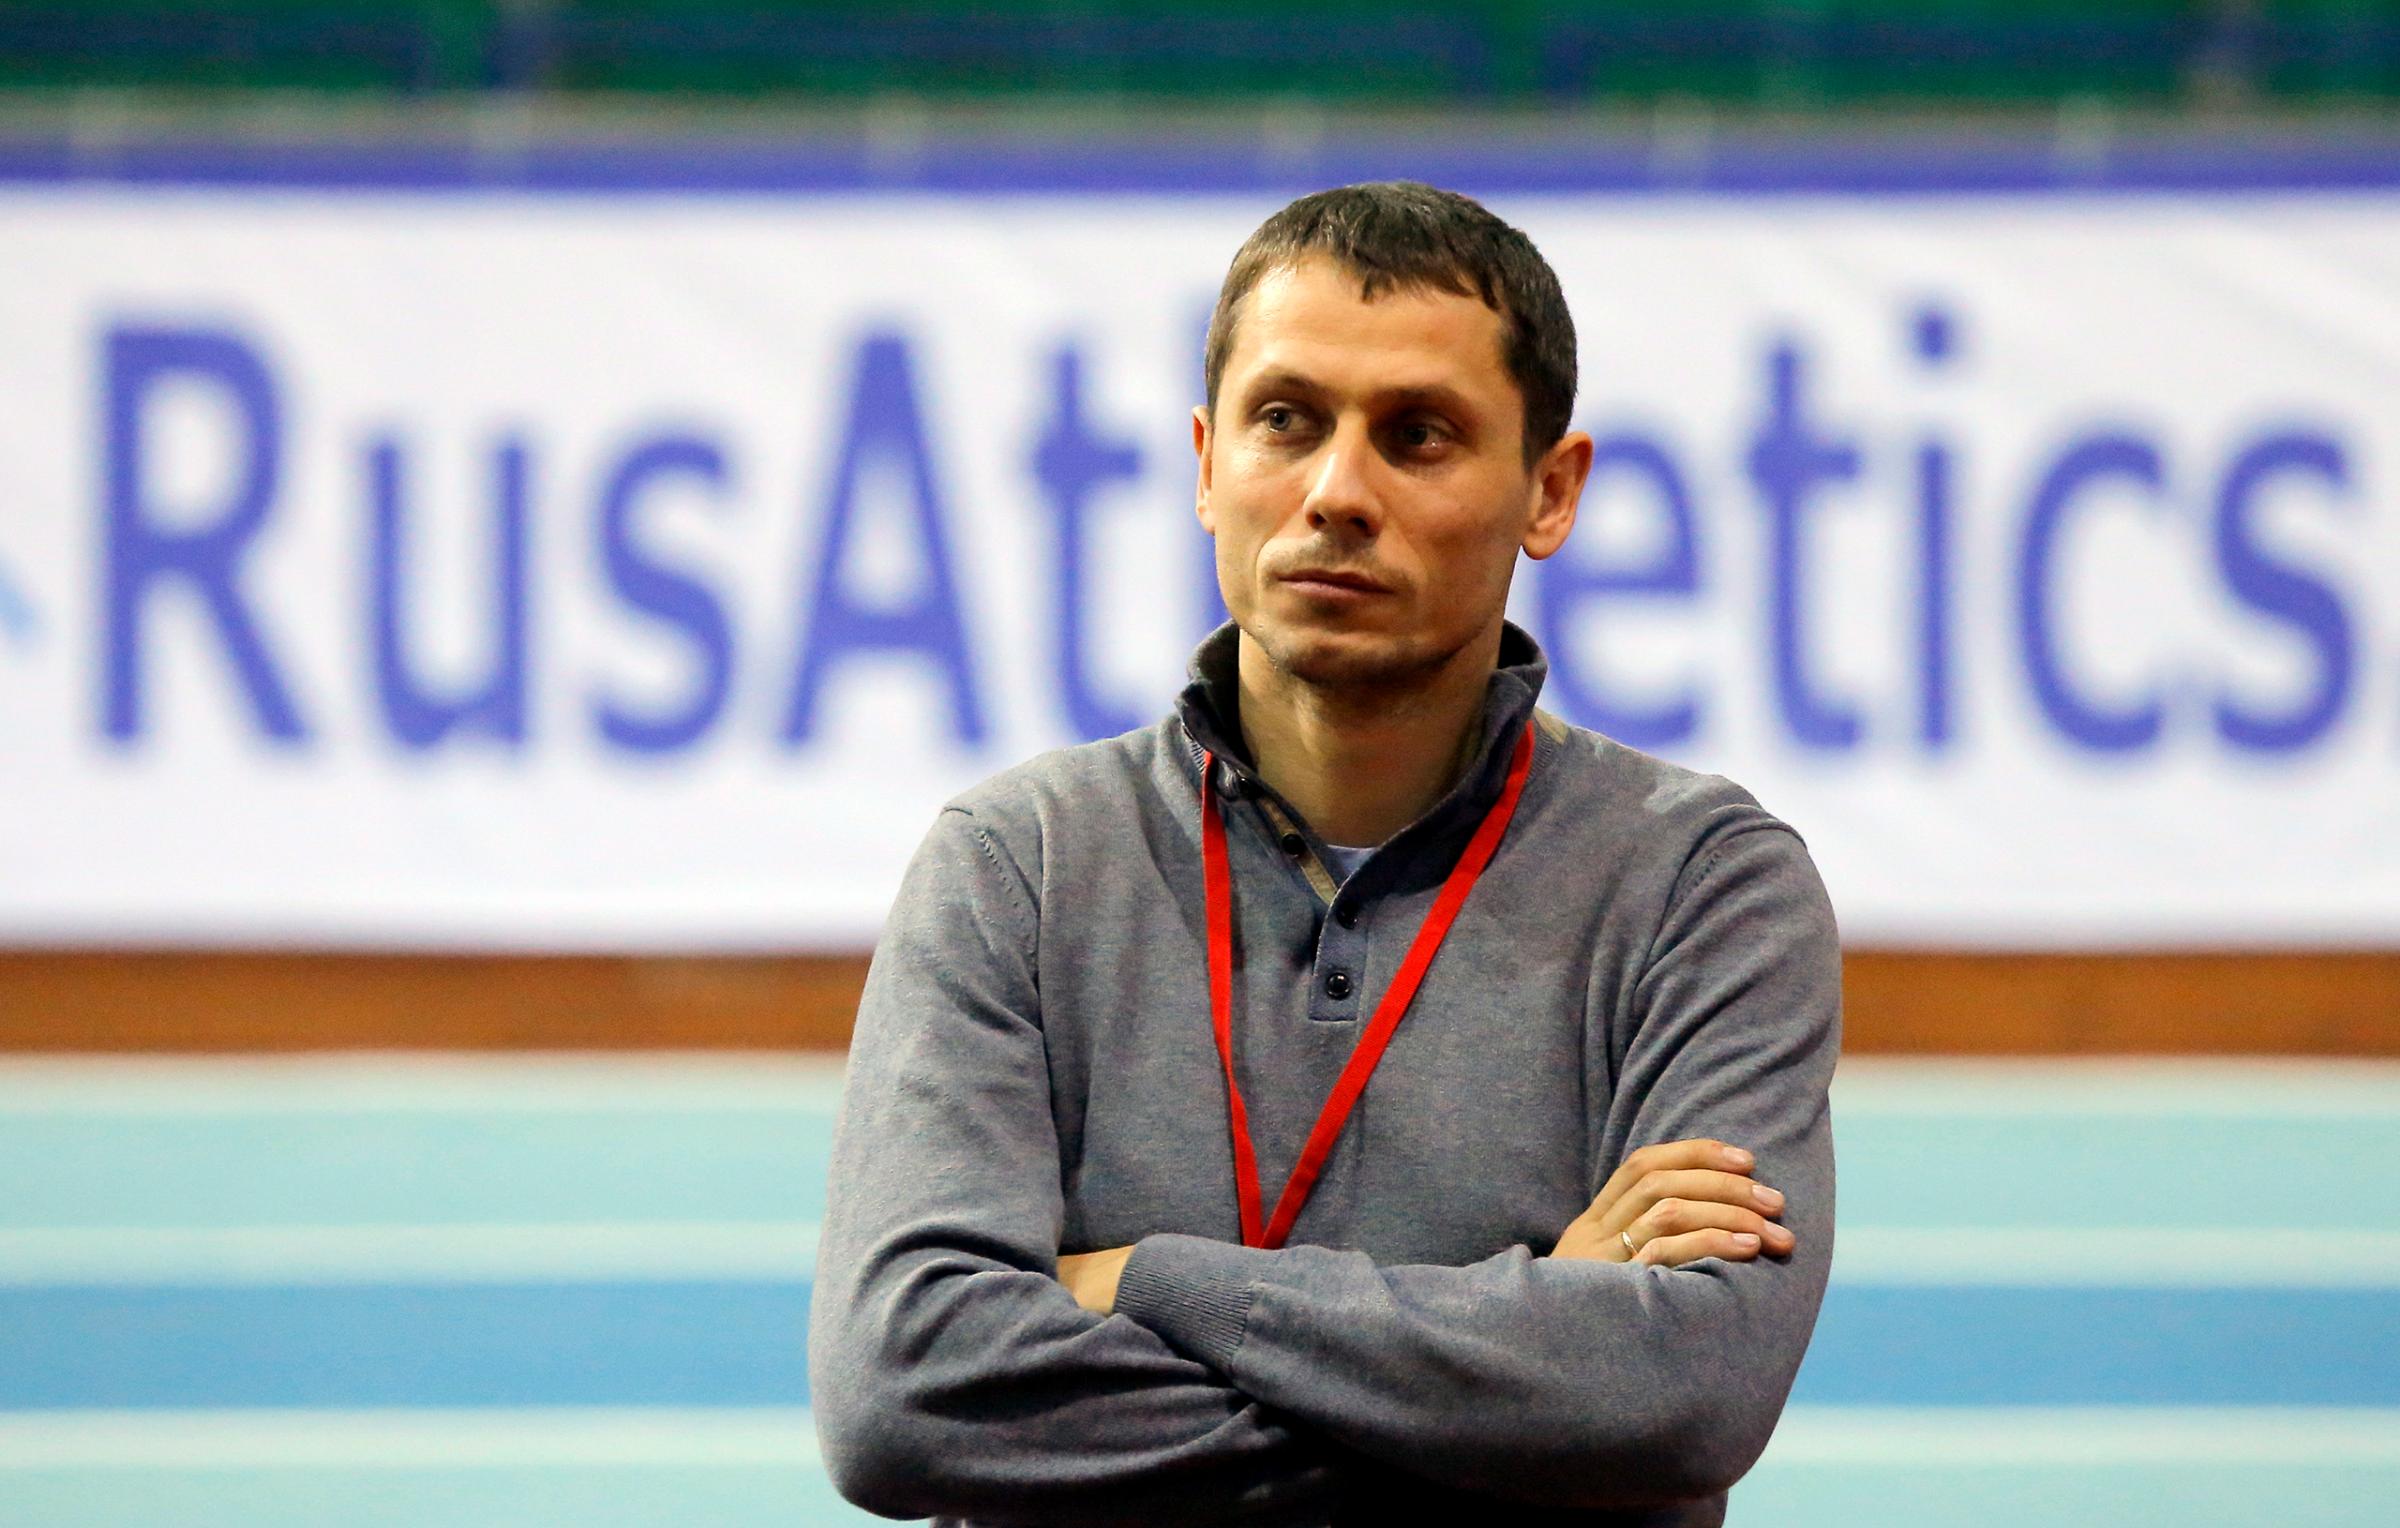 Head coach of Russian athletics team Borzakovsky attends Russian Indoor Championships in Moscow